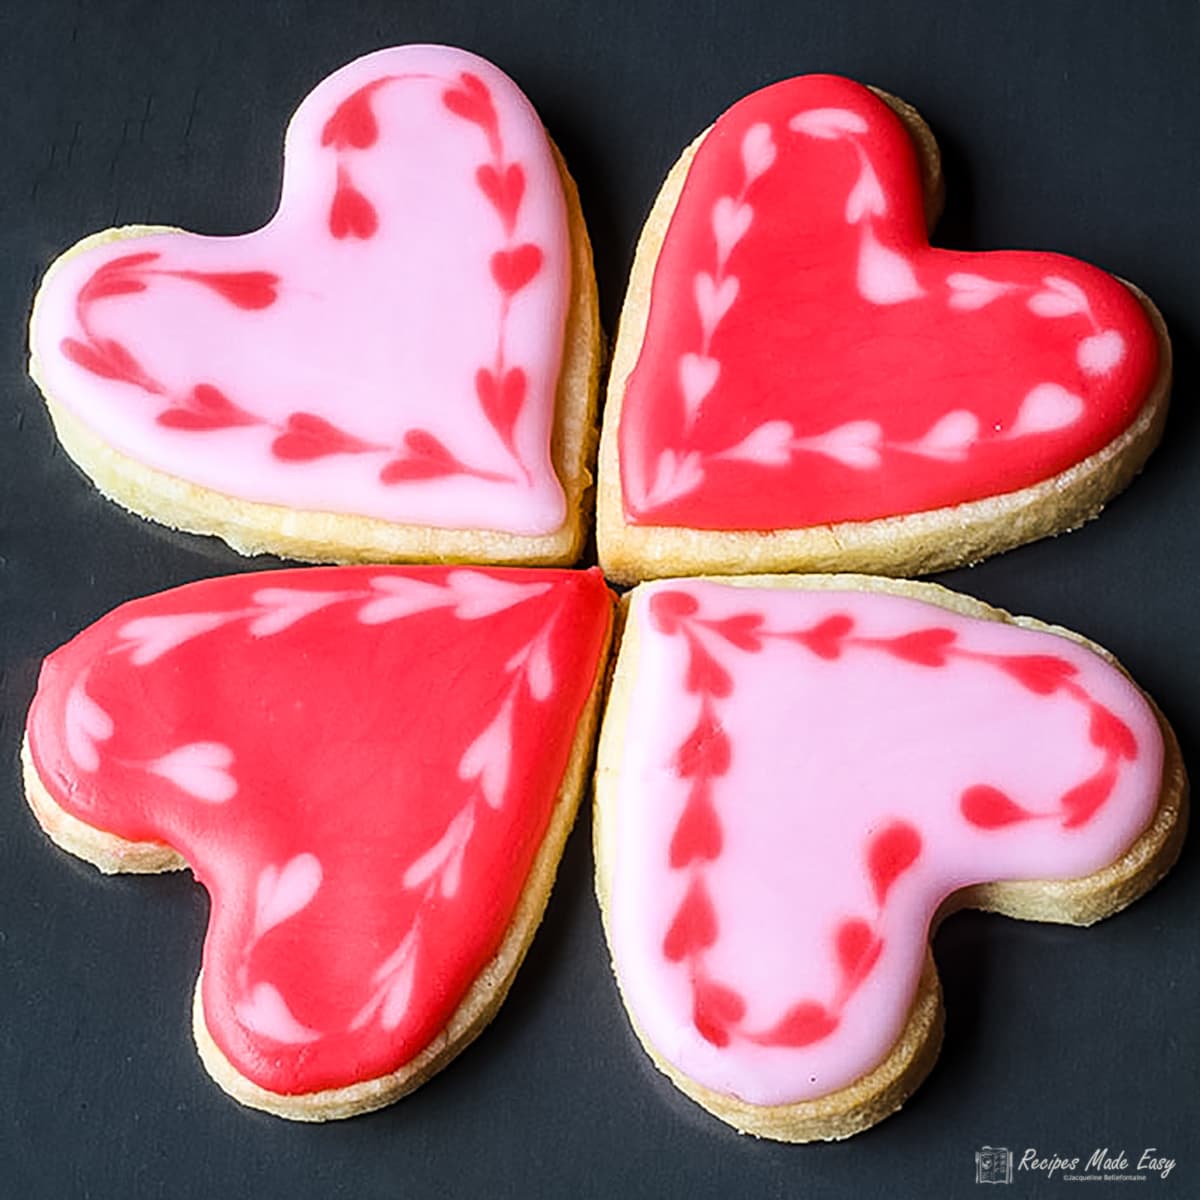 4 sweetheart cookies on a tray.